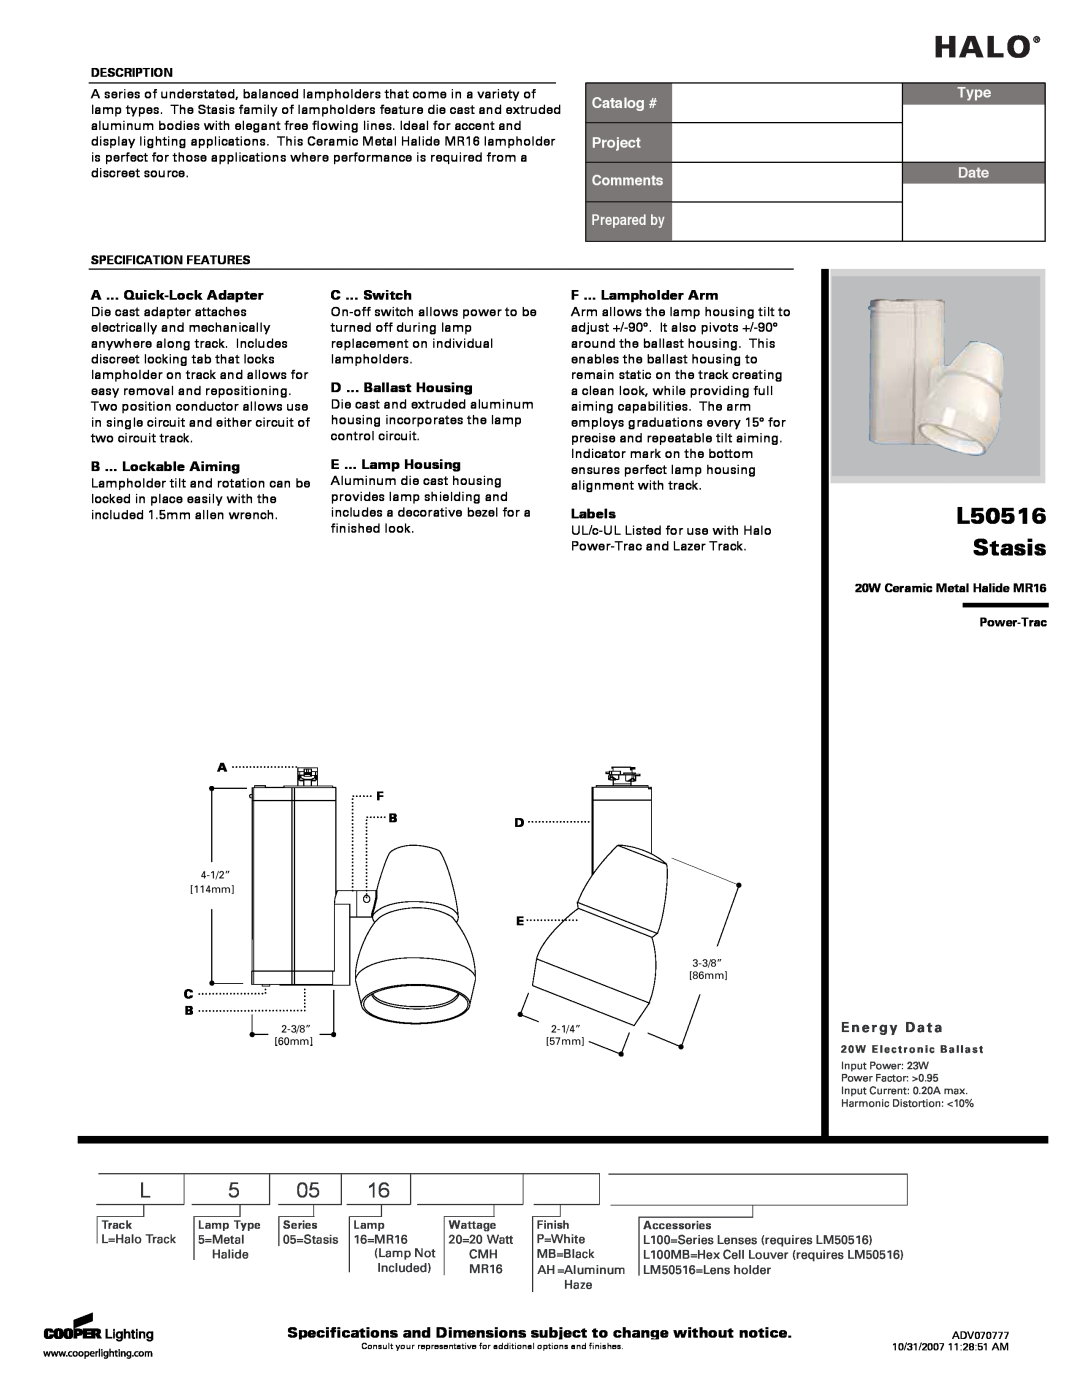 Cooper Lighting specifications E n e r g y D a t a, Halo, L50516 Stasis, Catalog #, Project Comments, Prepared by, Type 